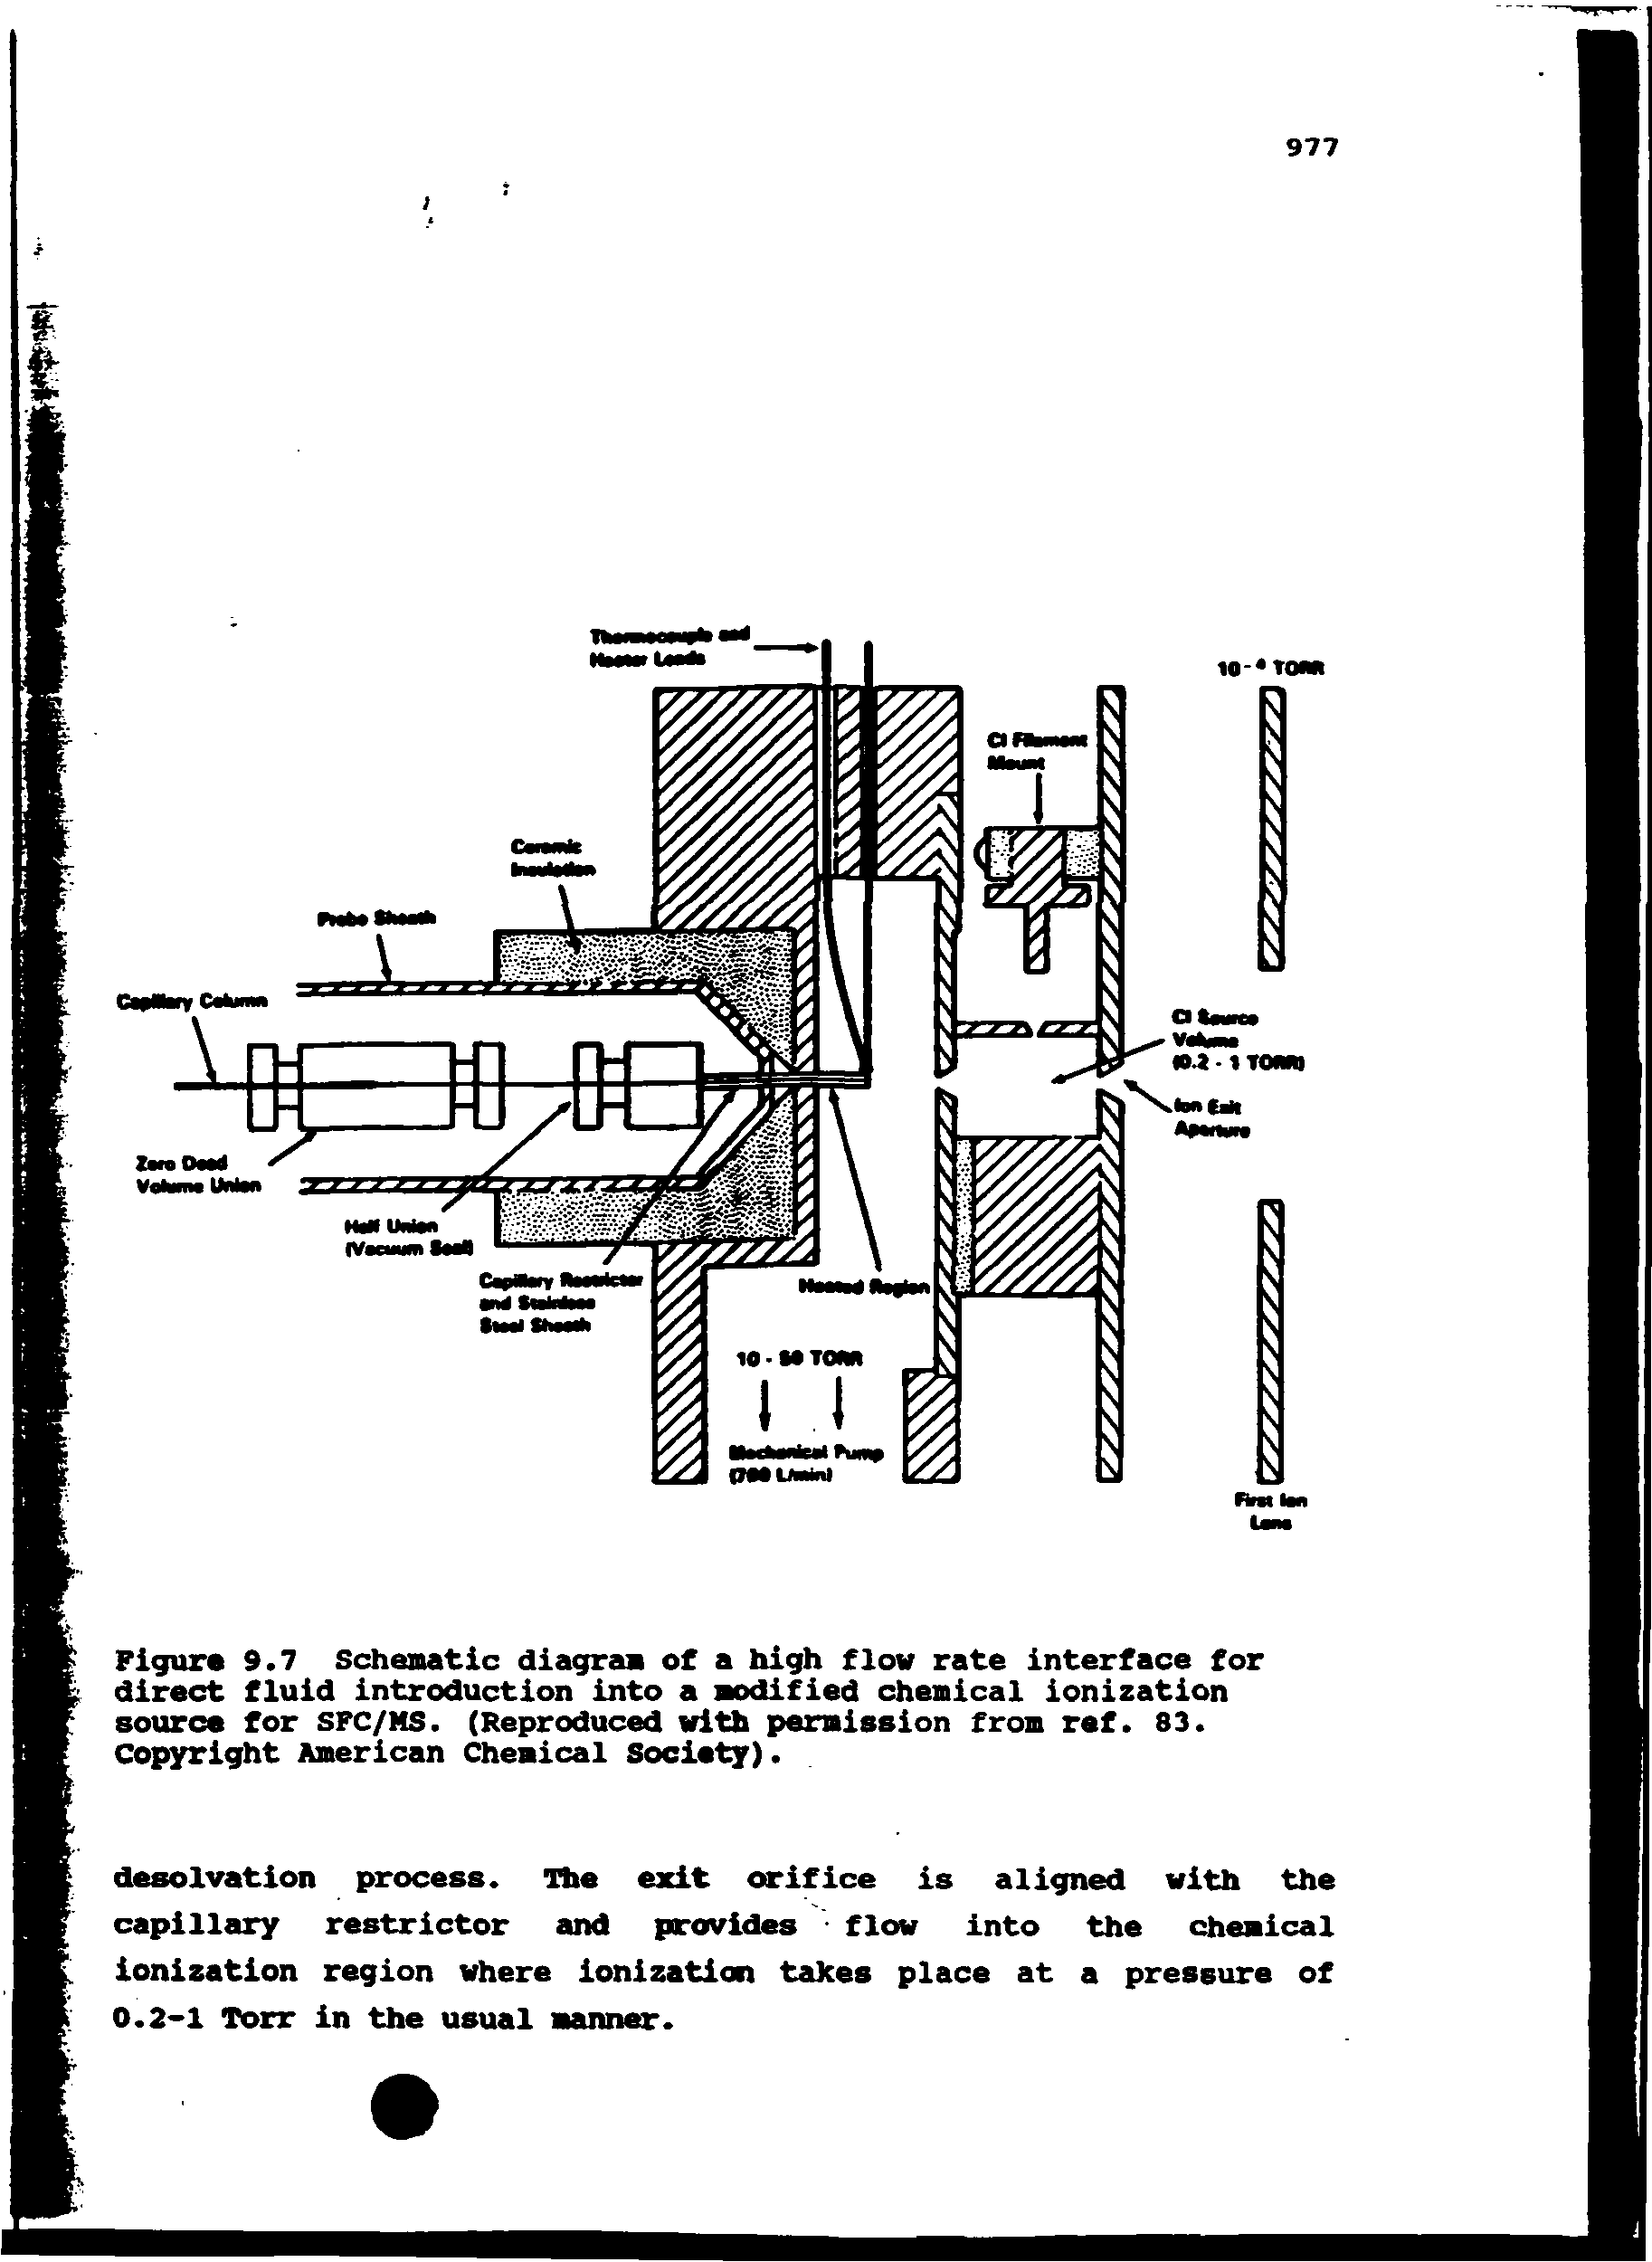 Figur 9.7 Schematic diagram of a high flow rate interface for direct fluid introduction into a modified chemical ionization source for SFC/MS. (Reproduced with permission from ref. 83. Copyright American Chemical Society).